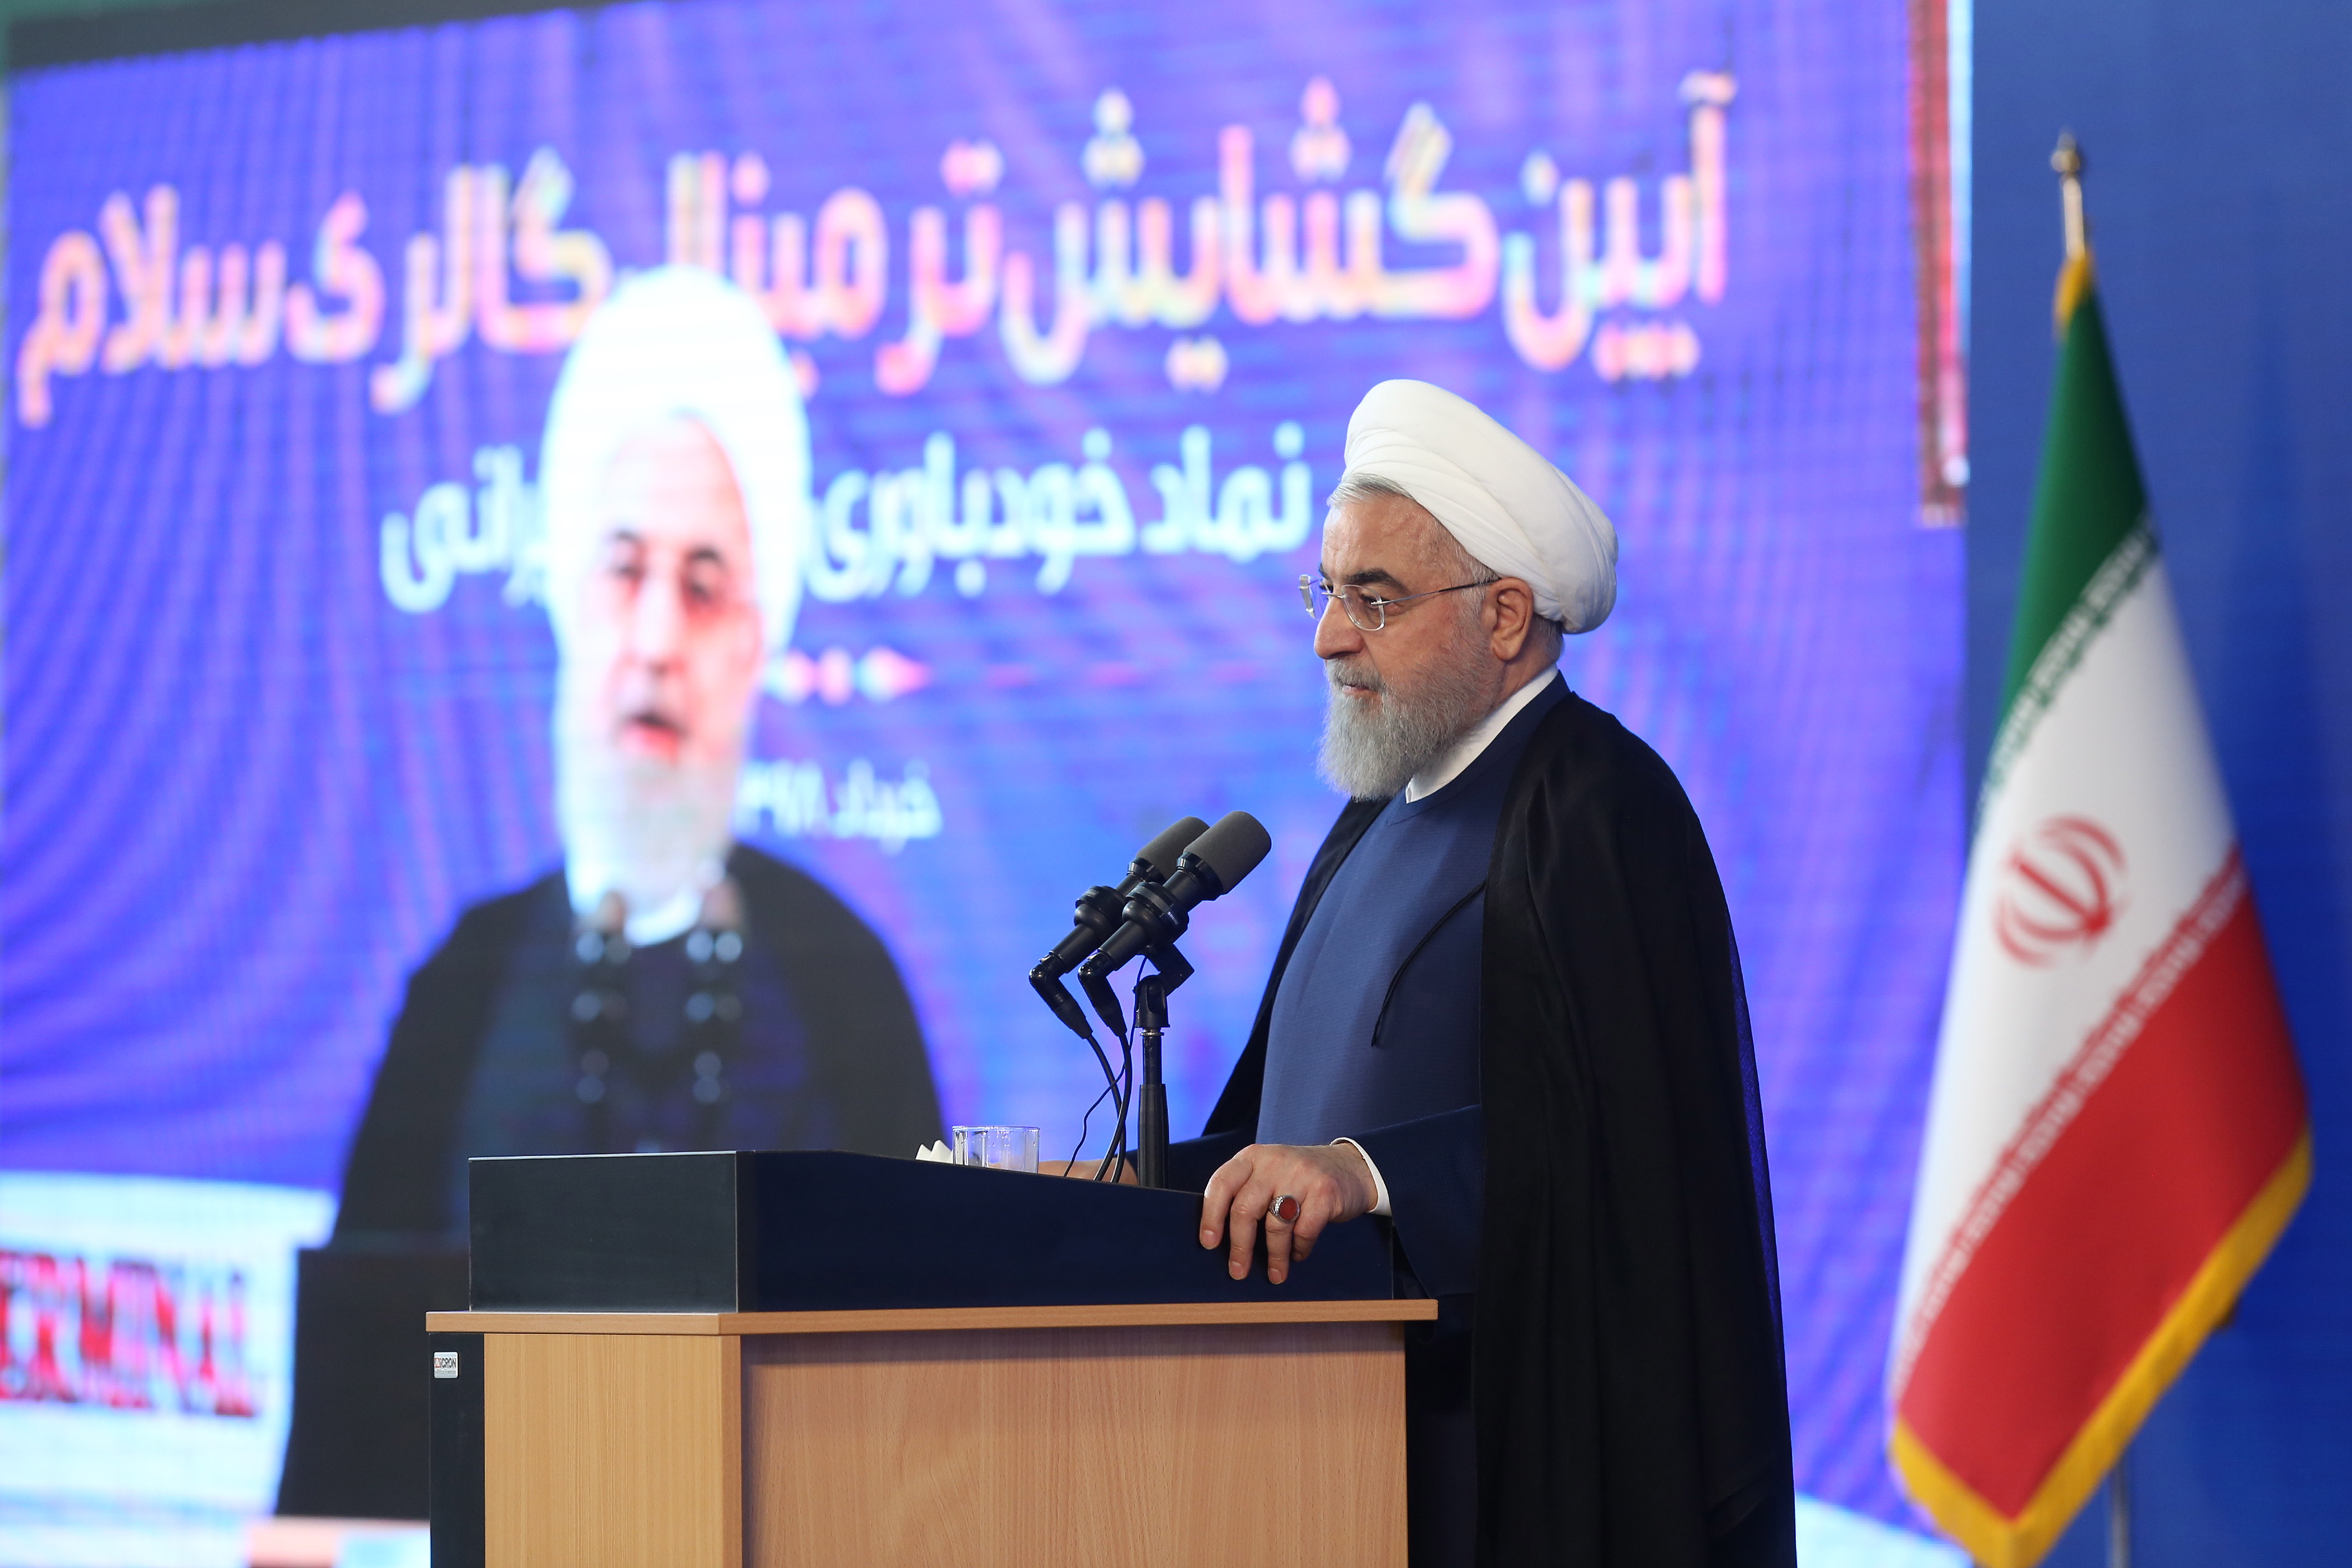 epa07655224 A handout photo made available by the Presidential Office shows Iranian president Hassan Rouhani speaks during the inauguration ceremony of a new terminal at the Iran international Imam Khomeini airport outside Tehran, Iran, 18 June 2019. Media reported that Rouhani said that Iran will be the winner of the wars against the enemies, referring to the tension between Iran and the US.  EPA/HO HANDOUT  HANDOUT EDITORIAL USE ONLY/NO SALES